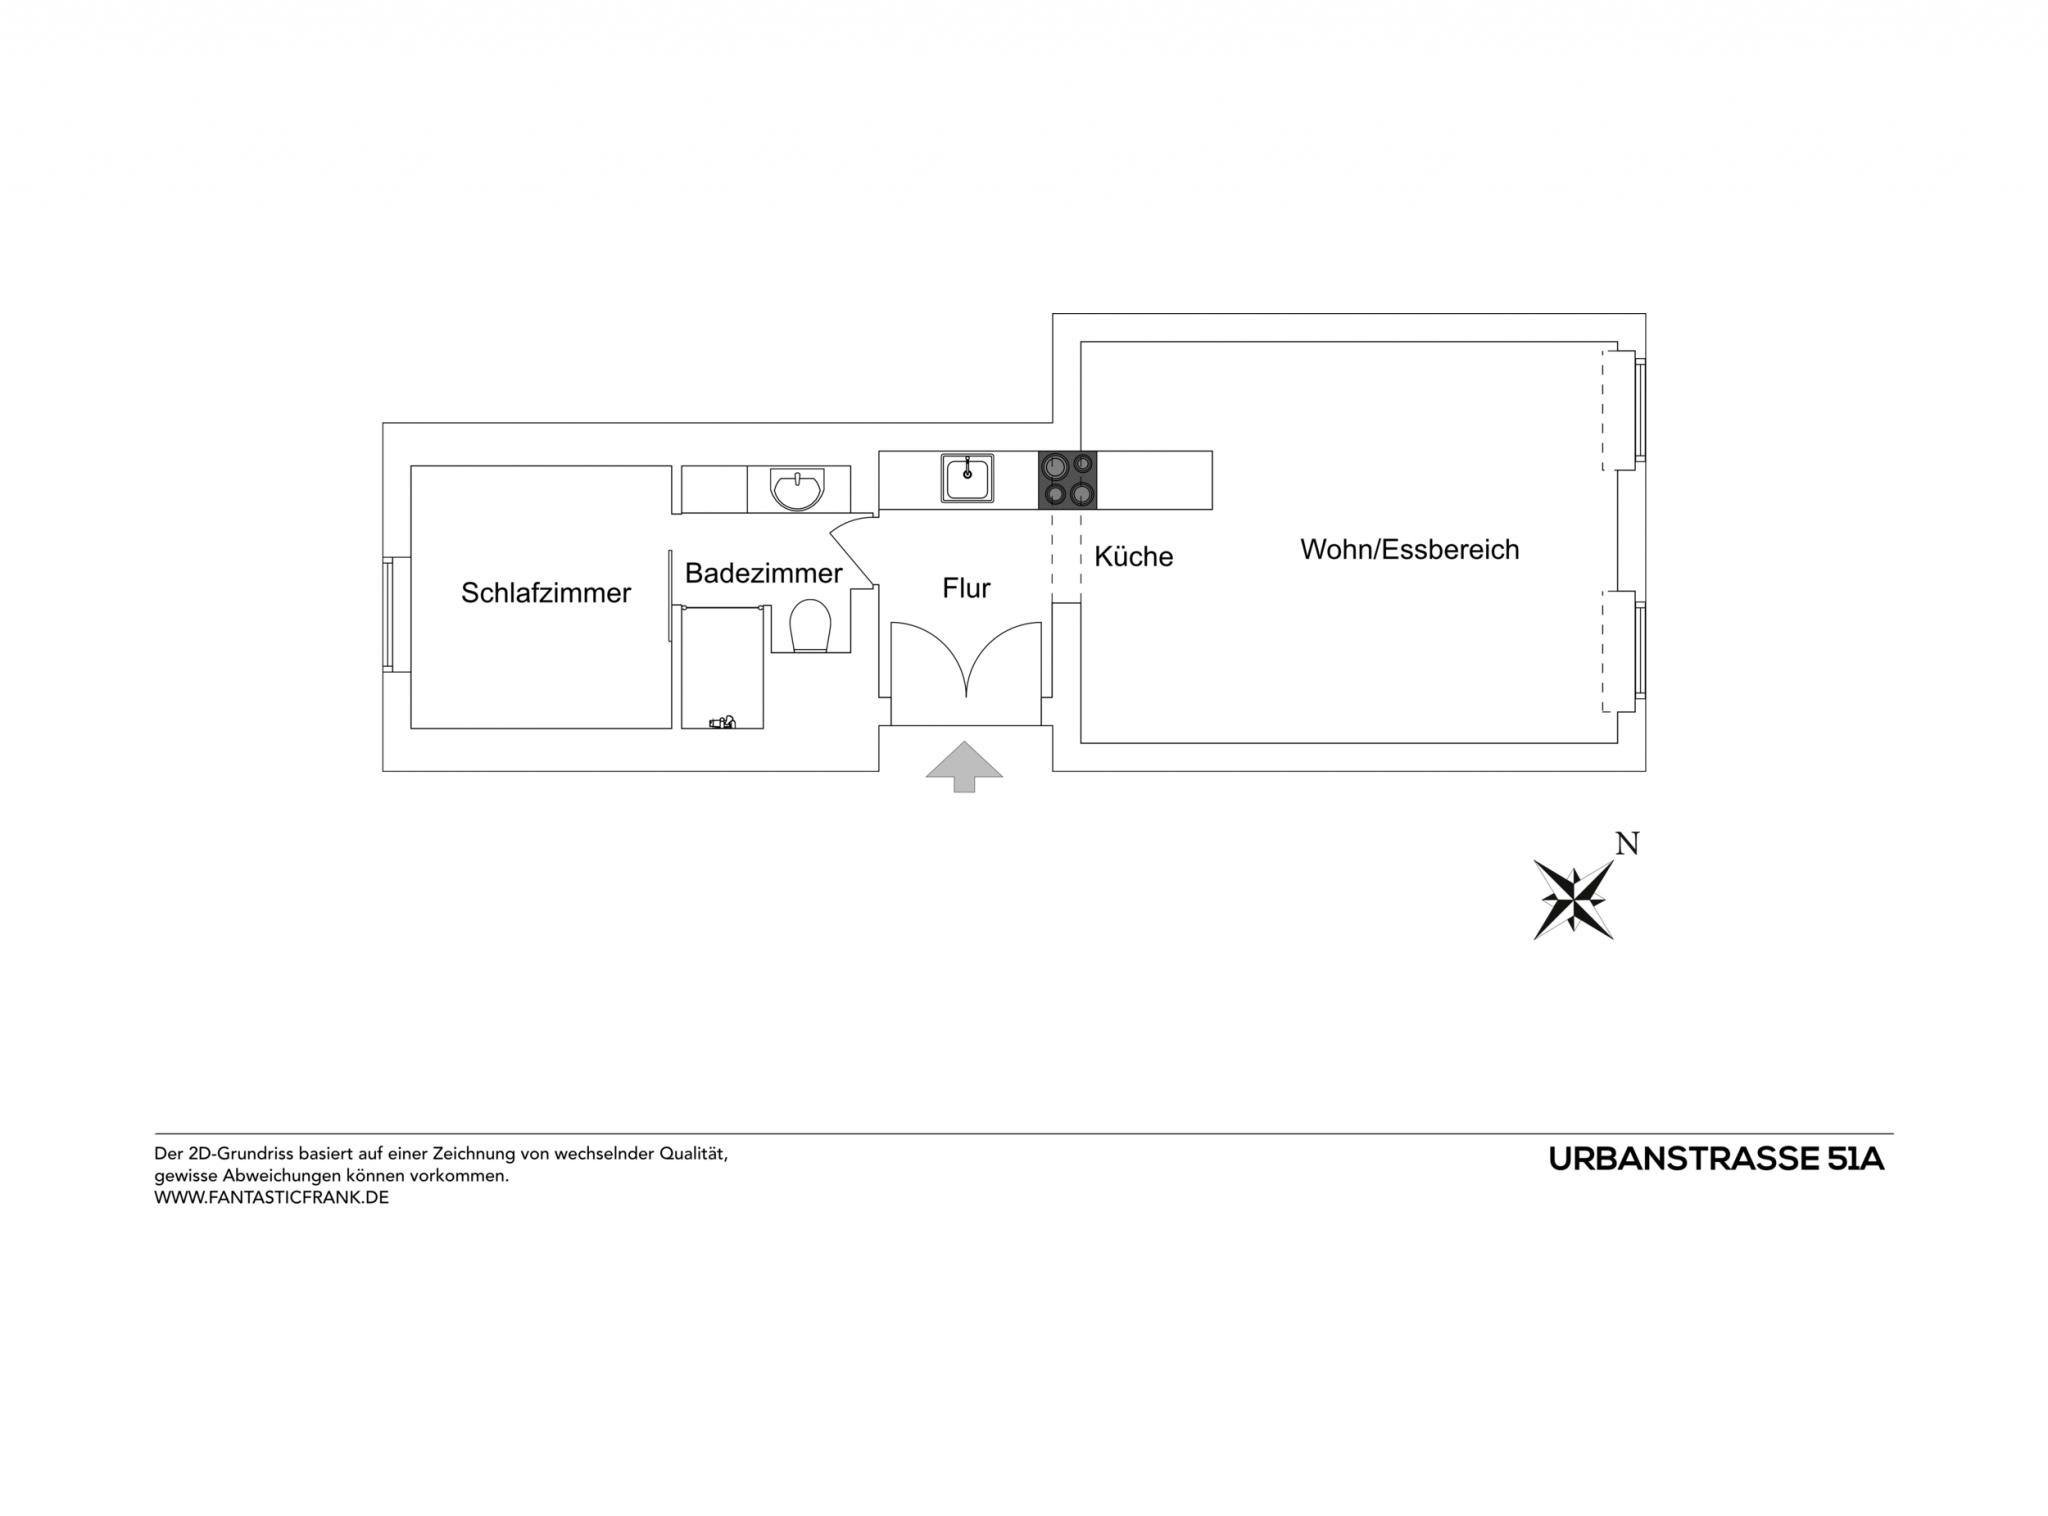 The image features a black and white floor plan of a house, which is a two-story home with a basement. The floor plan is divided into two sections, with the first section containing the main living area and the second section containing the bedrooms and bathrooms. The living area is located on the first floor, while the bedrooms and bathrooms are located on the second floor.

The floor plan also includes a kitchen, which is located on the second floor. The kitchen is described as a "small" kitchen, which is a common term used to describe a kitchen that is smaller in size compared to a typical kitch